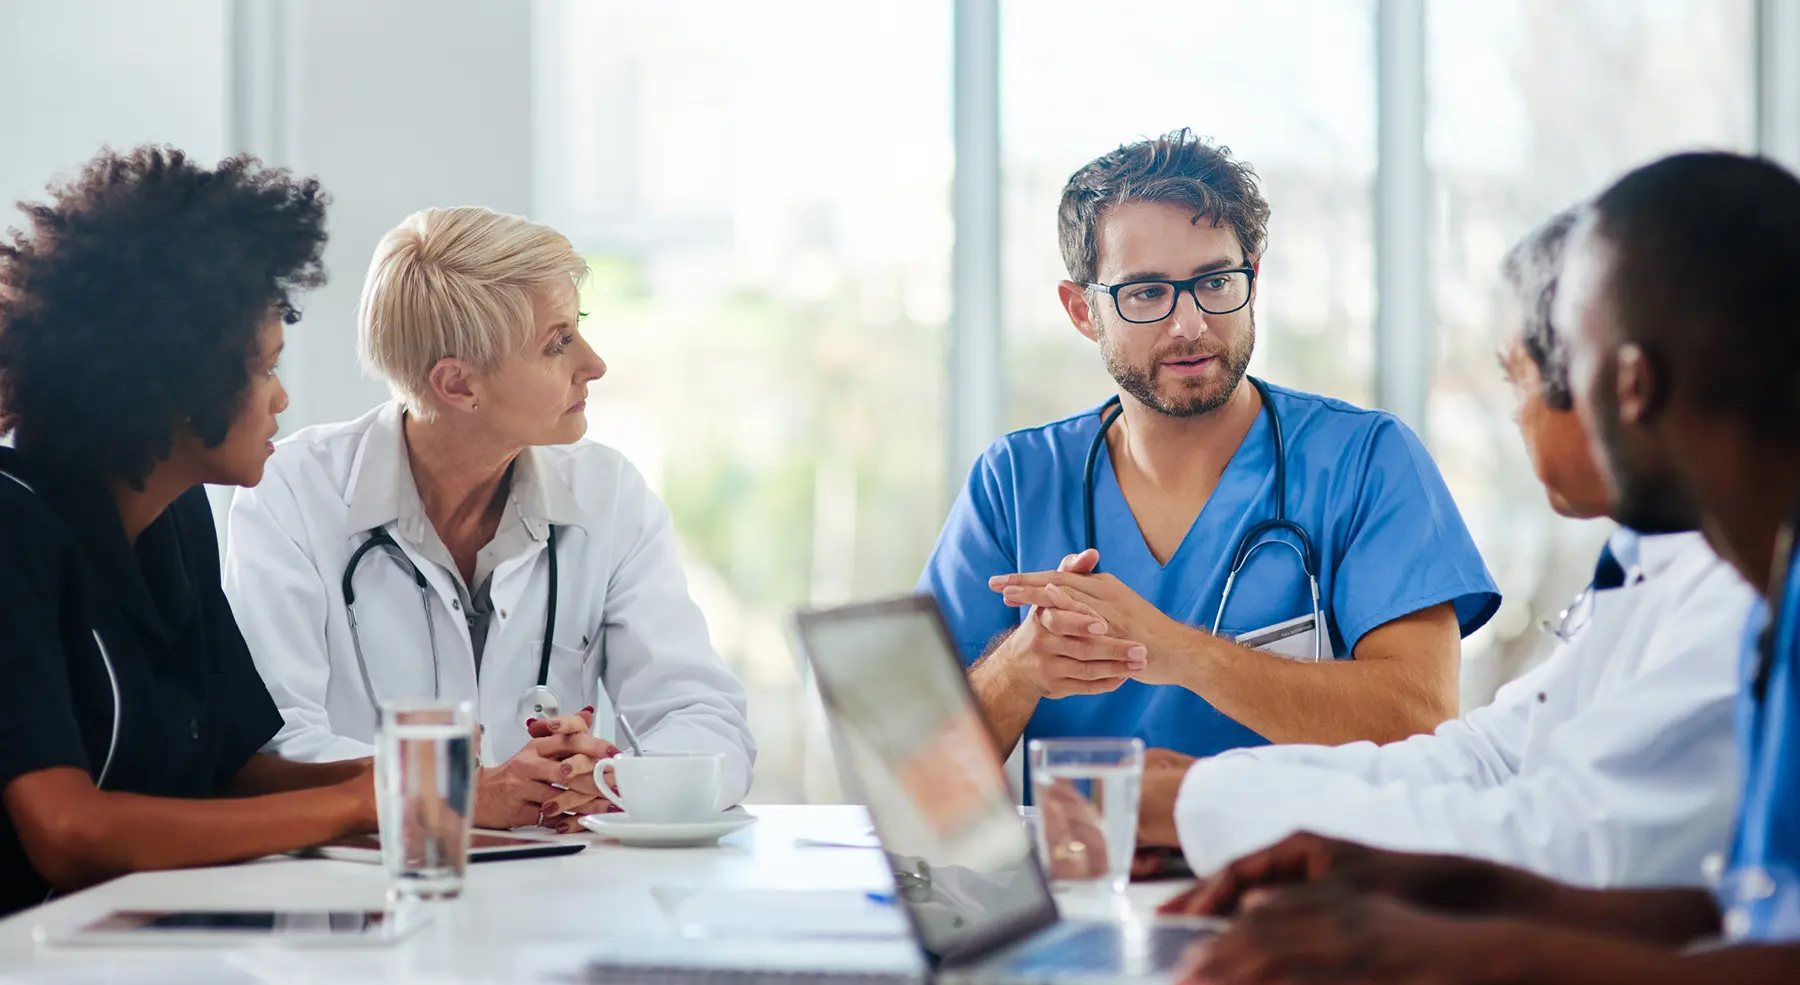 A group of medical professionals sits at a table having a conversation.